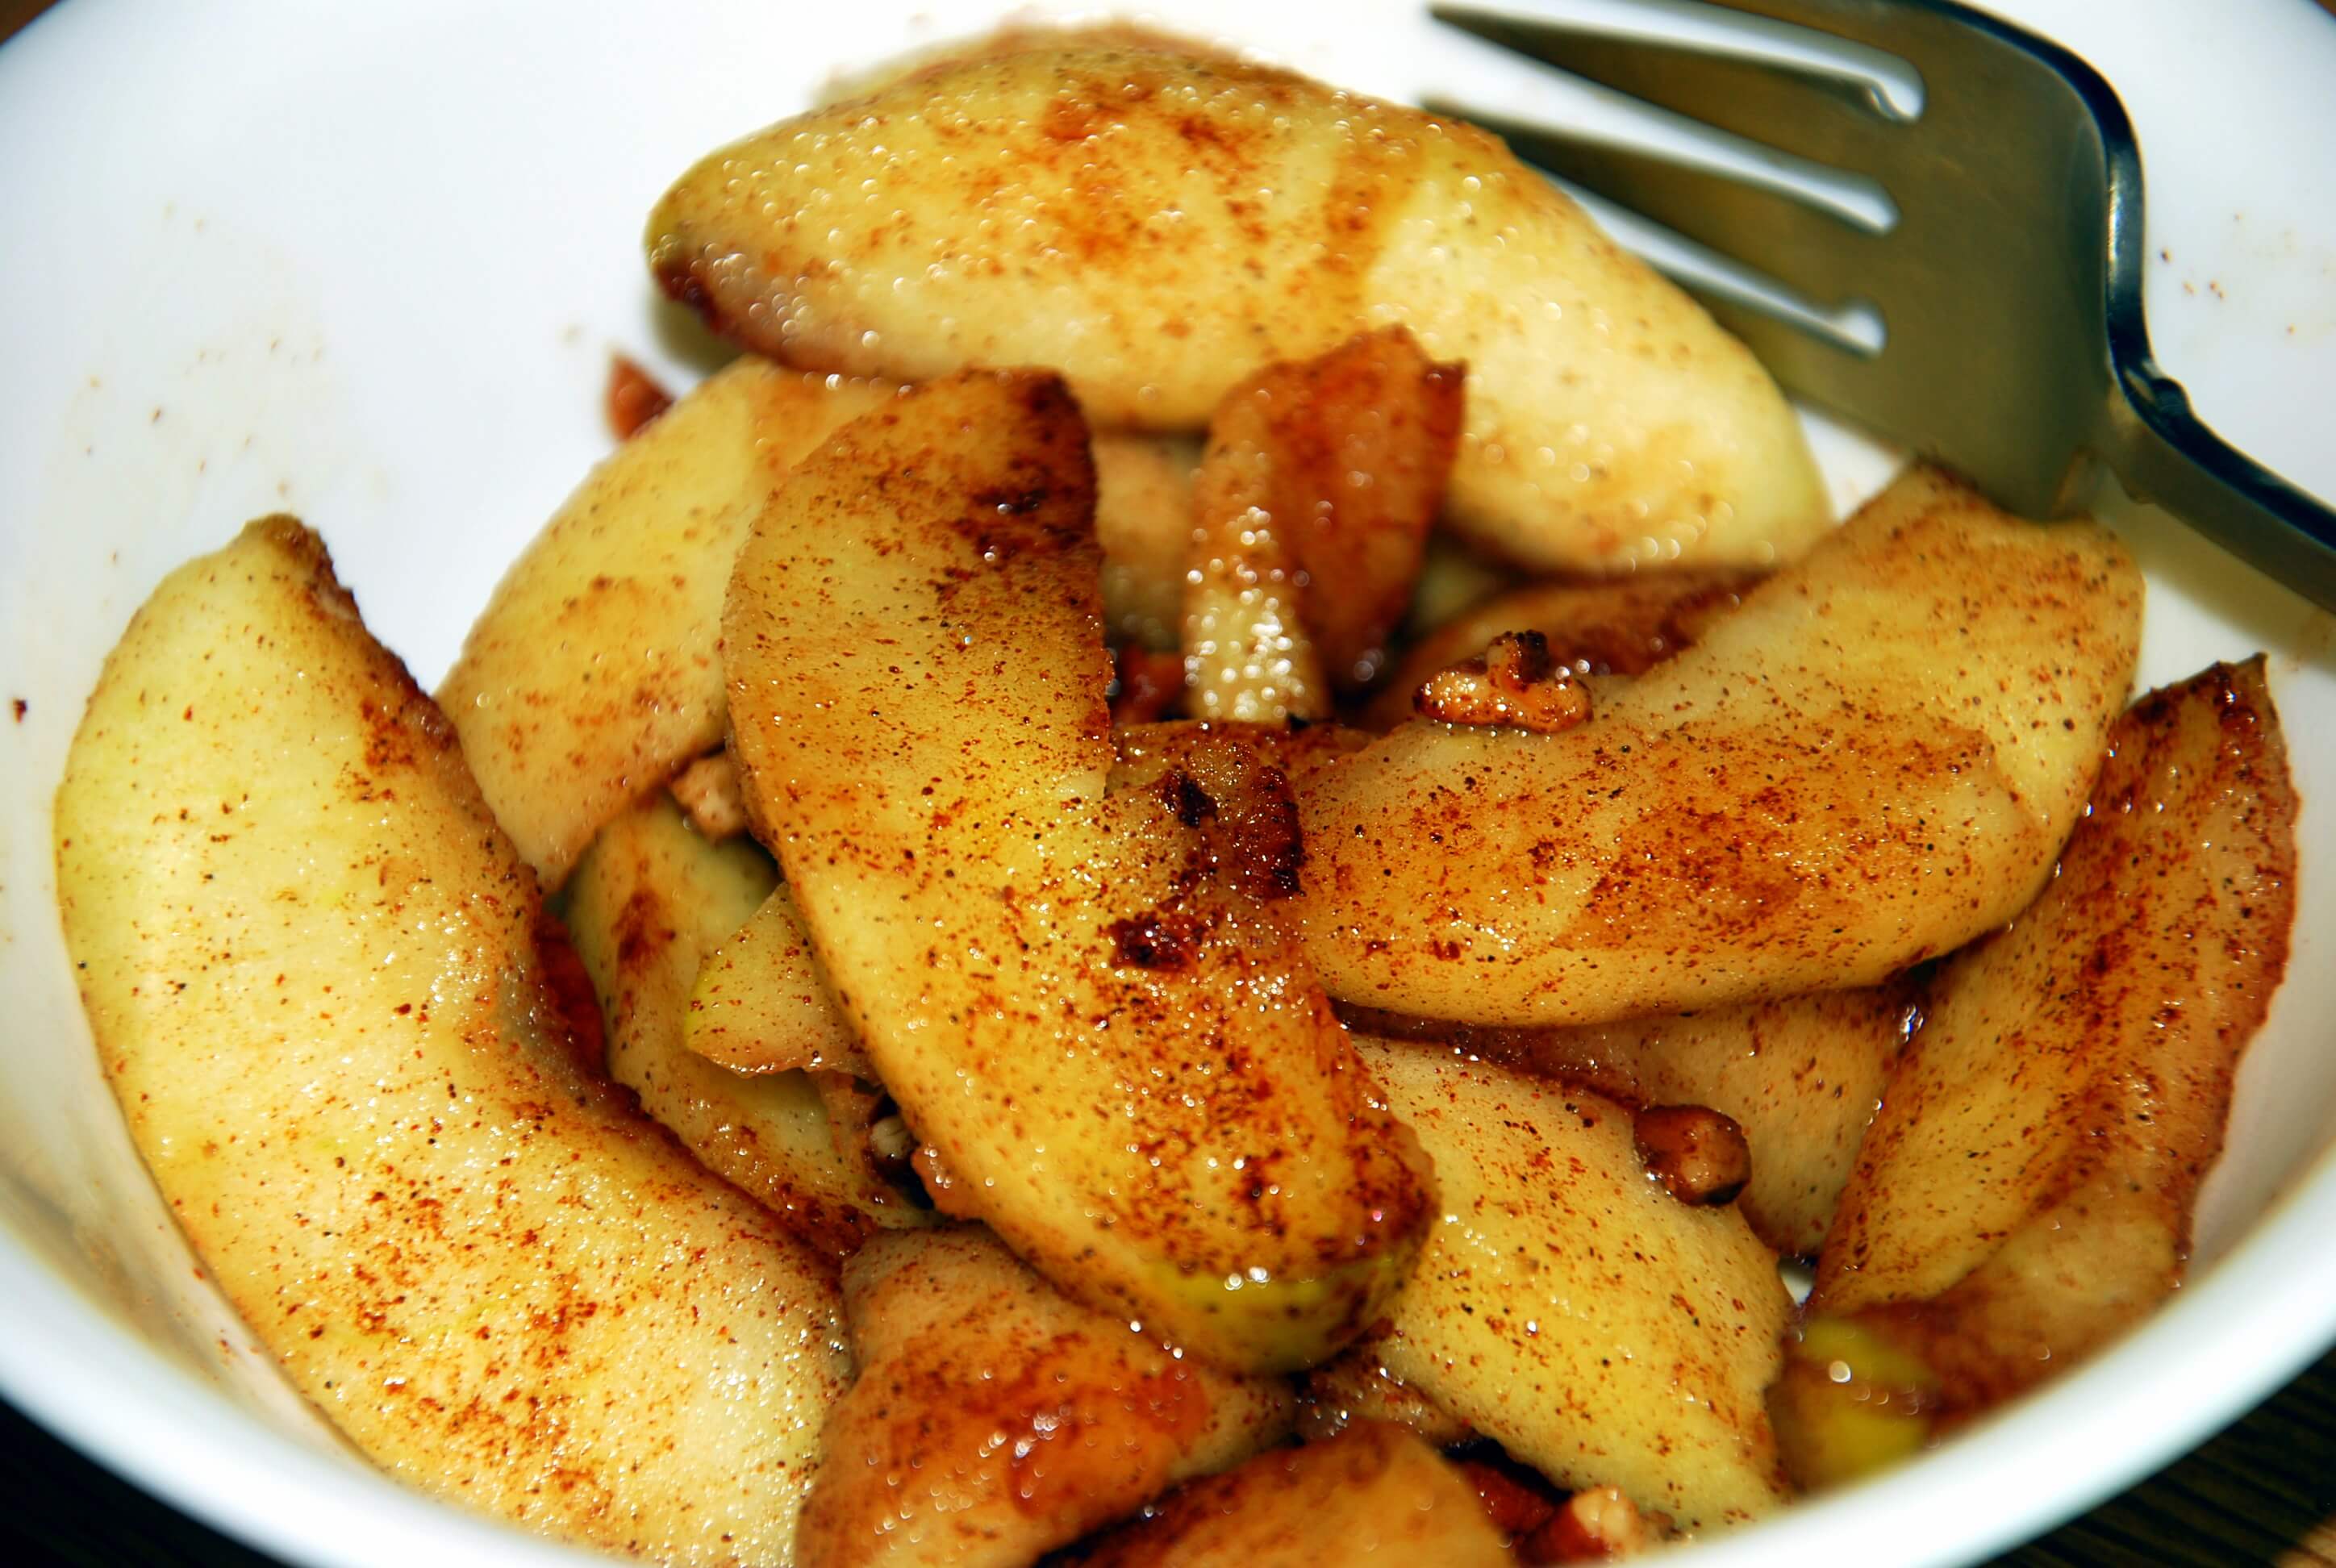 Caramelized Apples and Cinnamon